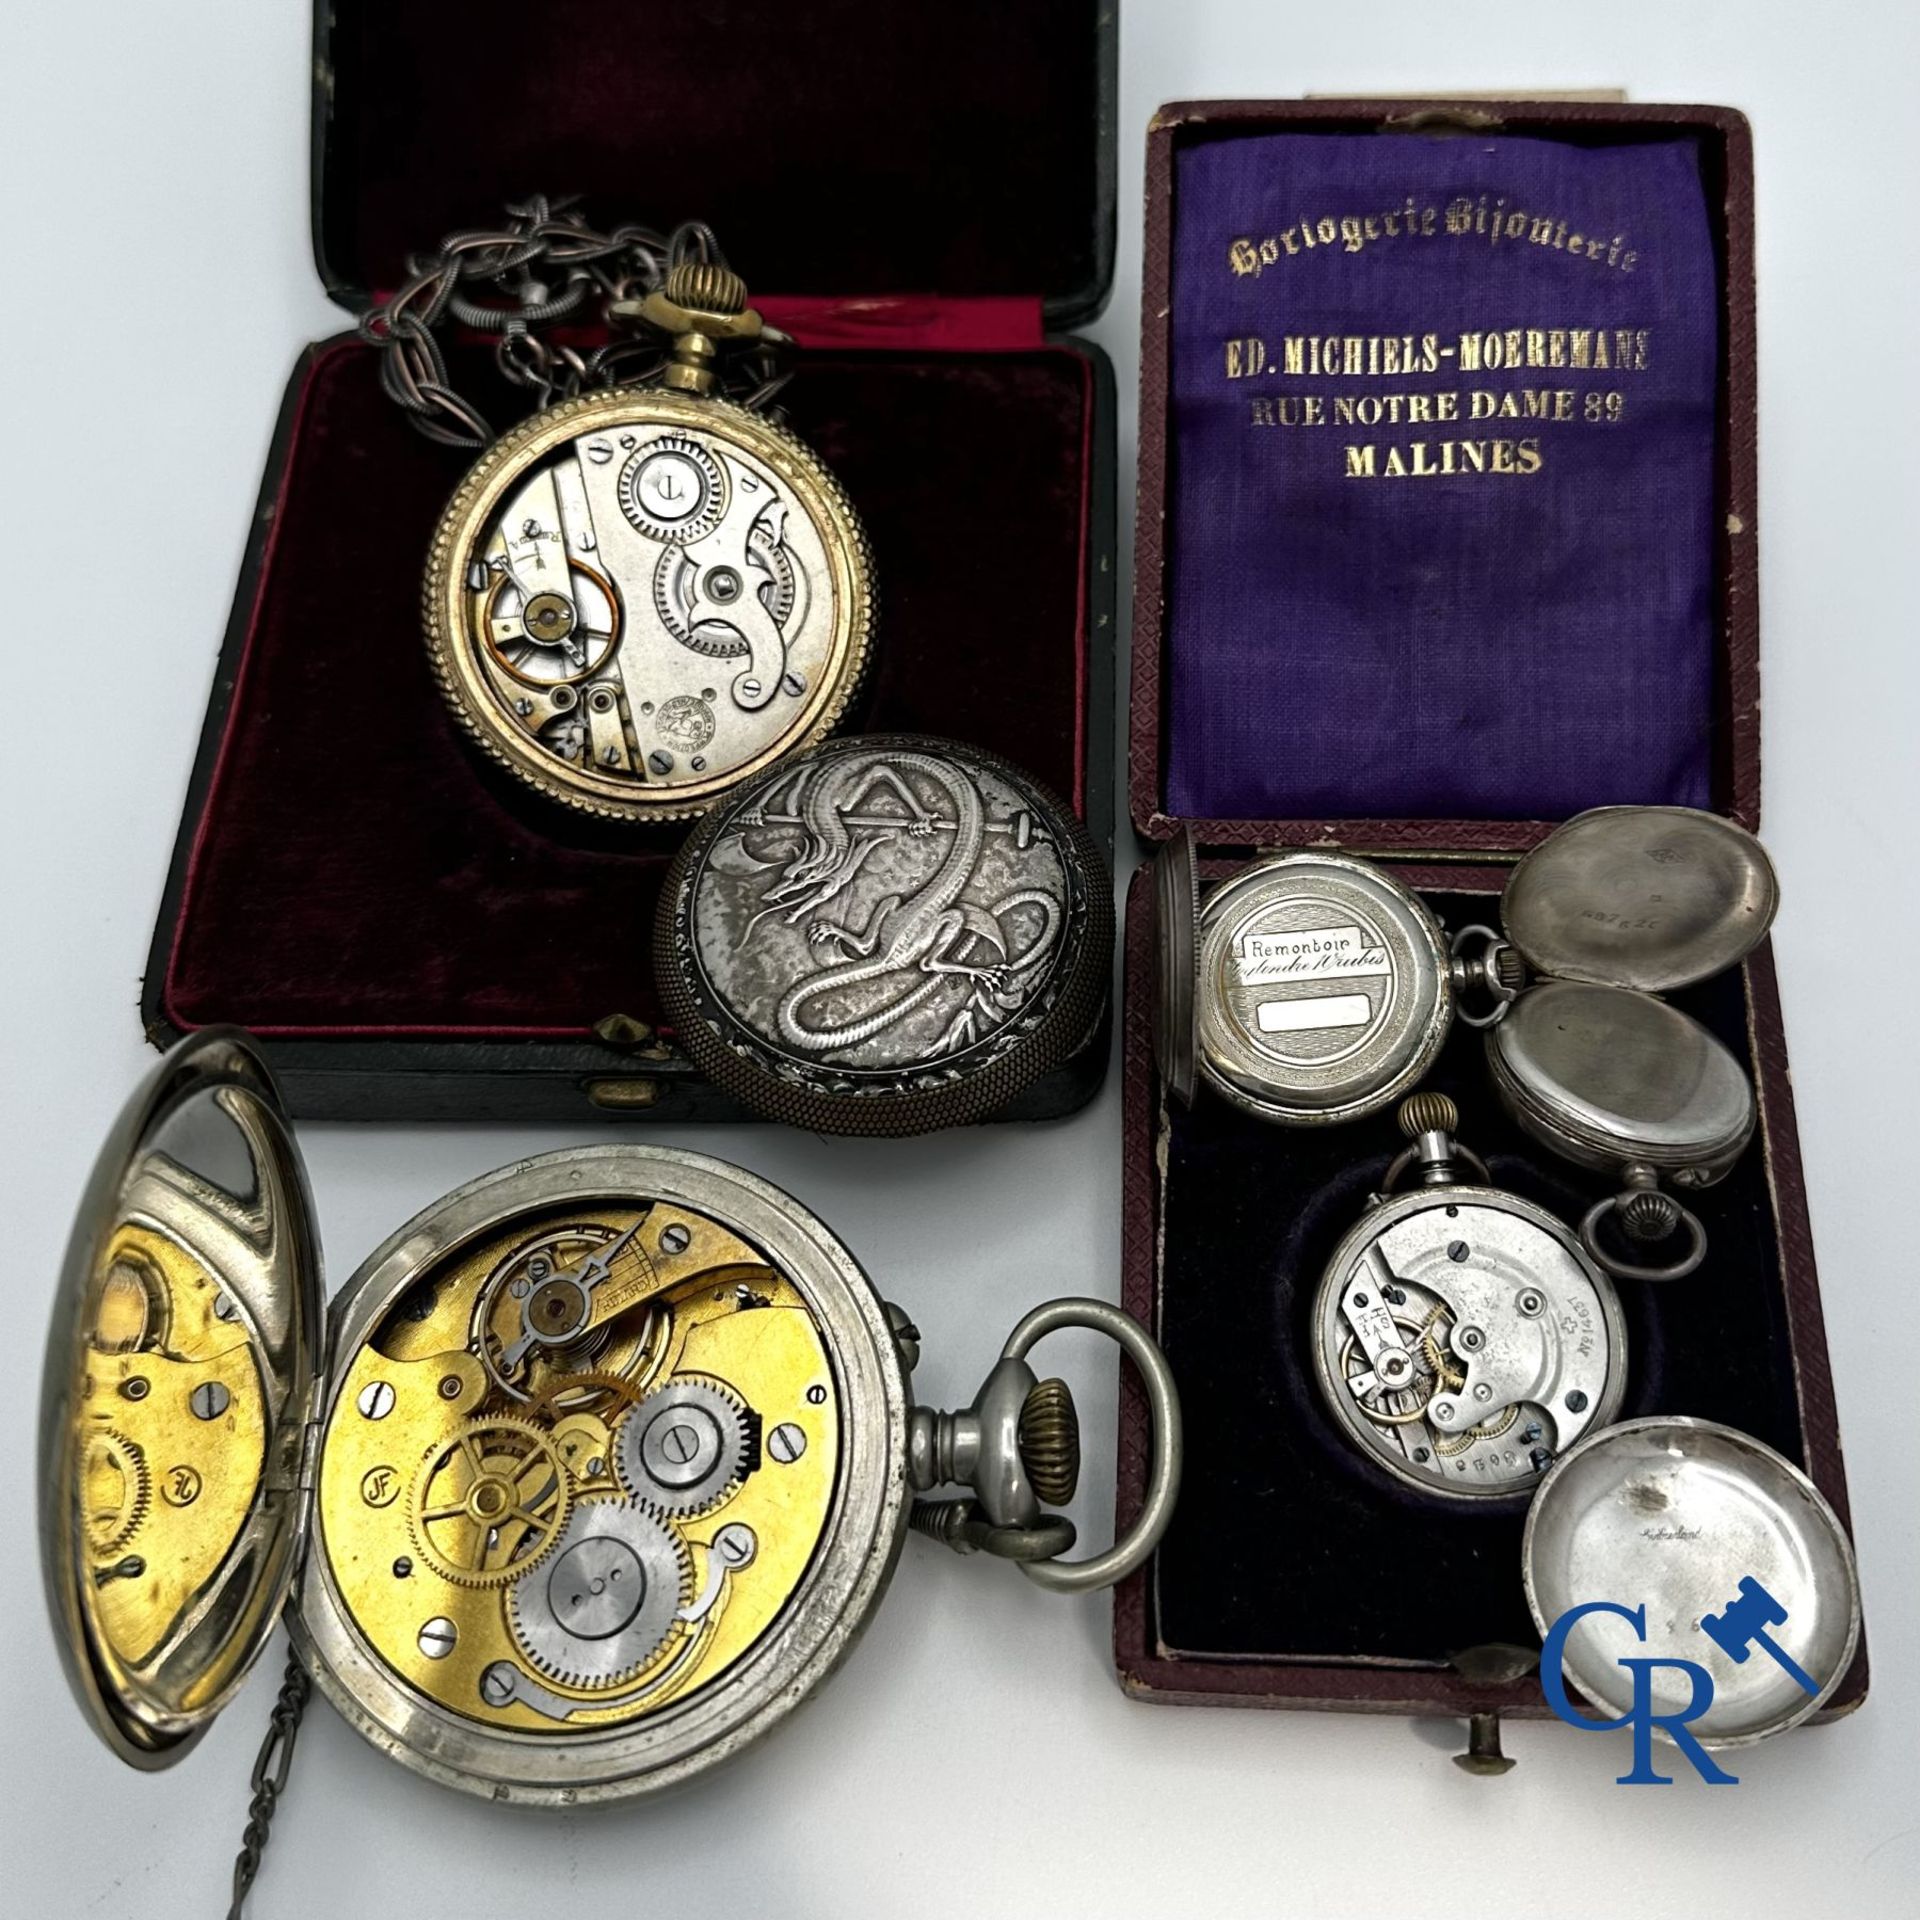 Jewellery-watches: Lot consisting of 2 large men's pocket watches and 3 women's watches. - Bild 2 aus 2